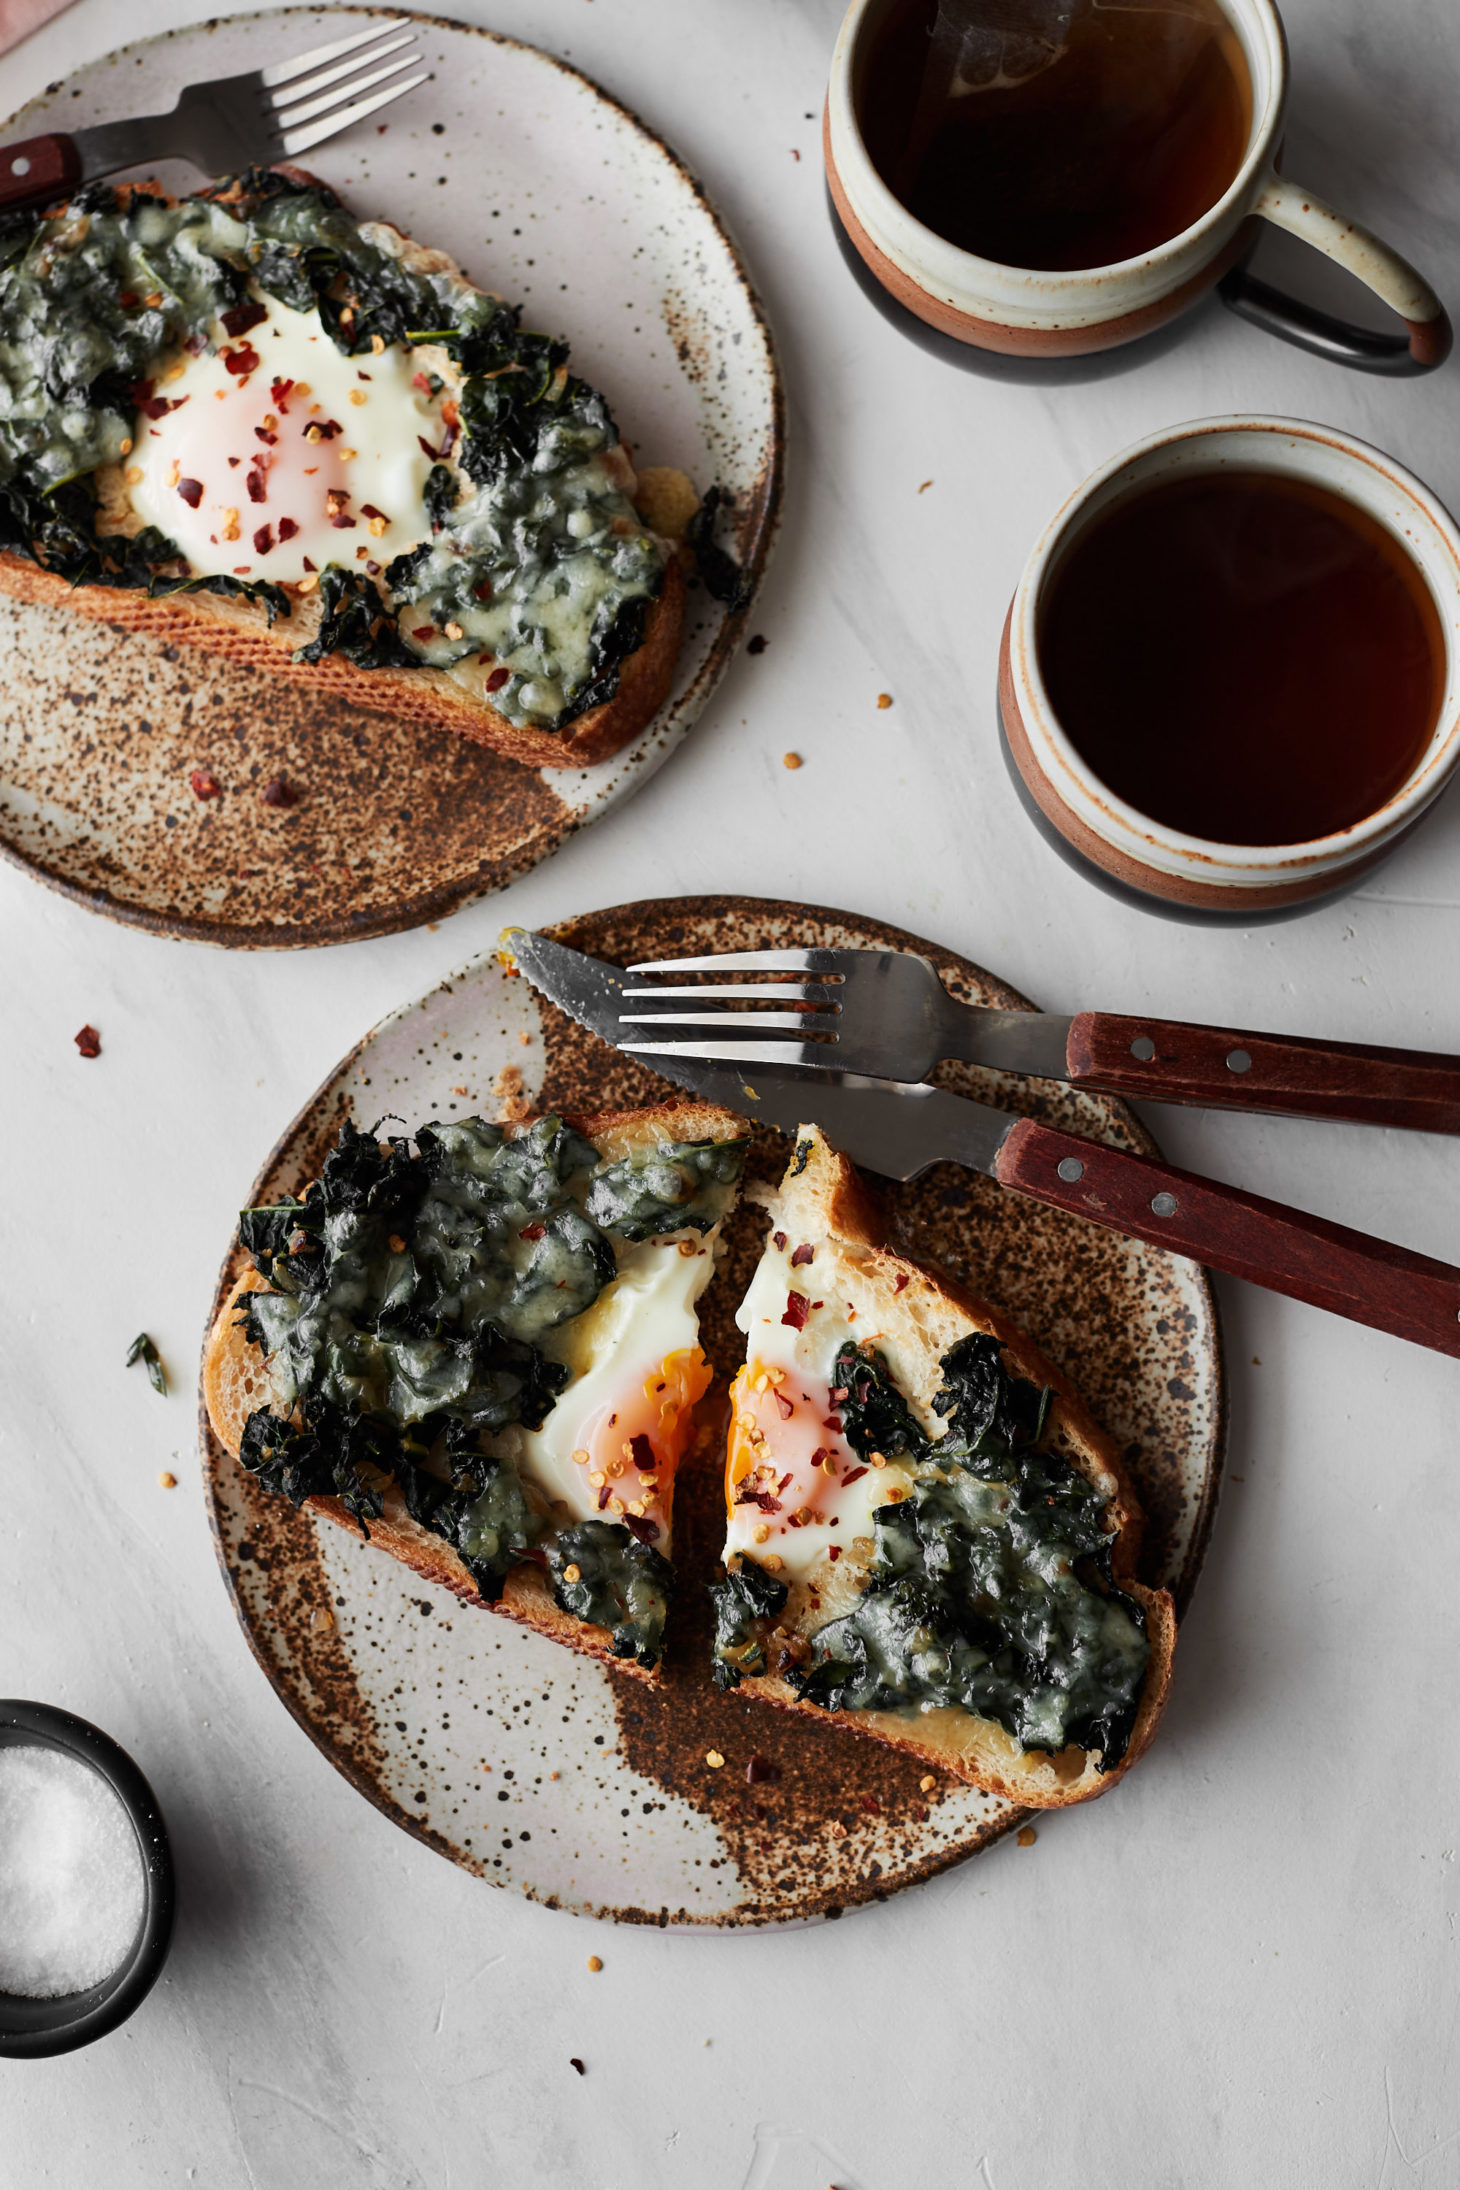 Kale Egg in a Hole